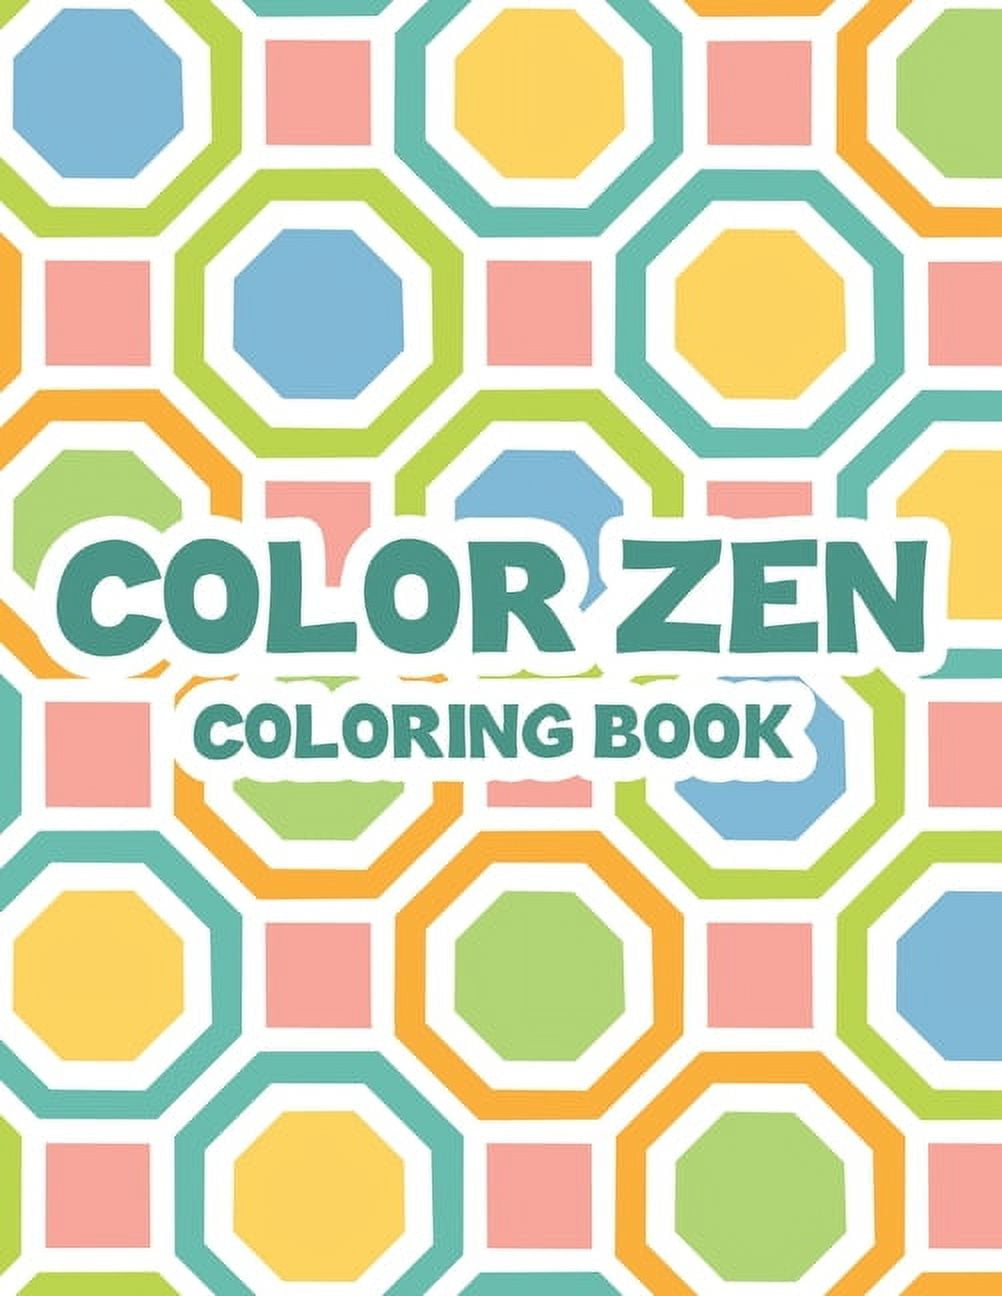 Zen Garden Adult Coloring Book - A2Z Science & Learning Toy Store